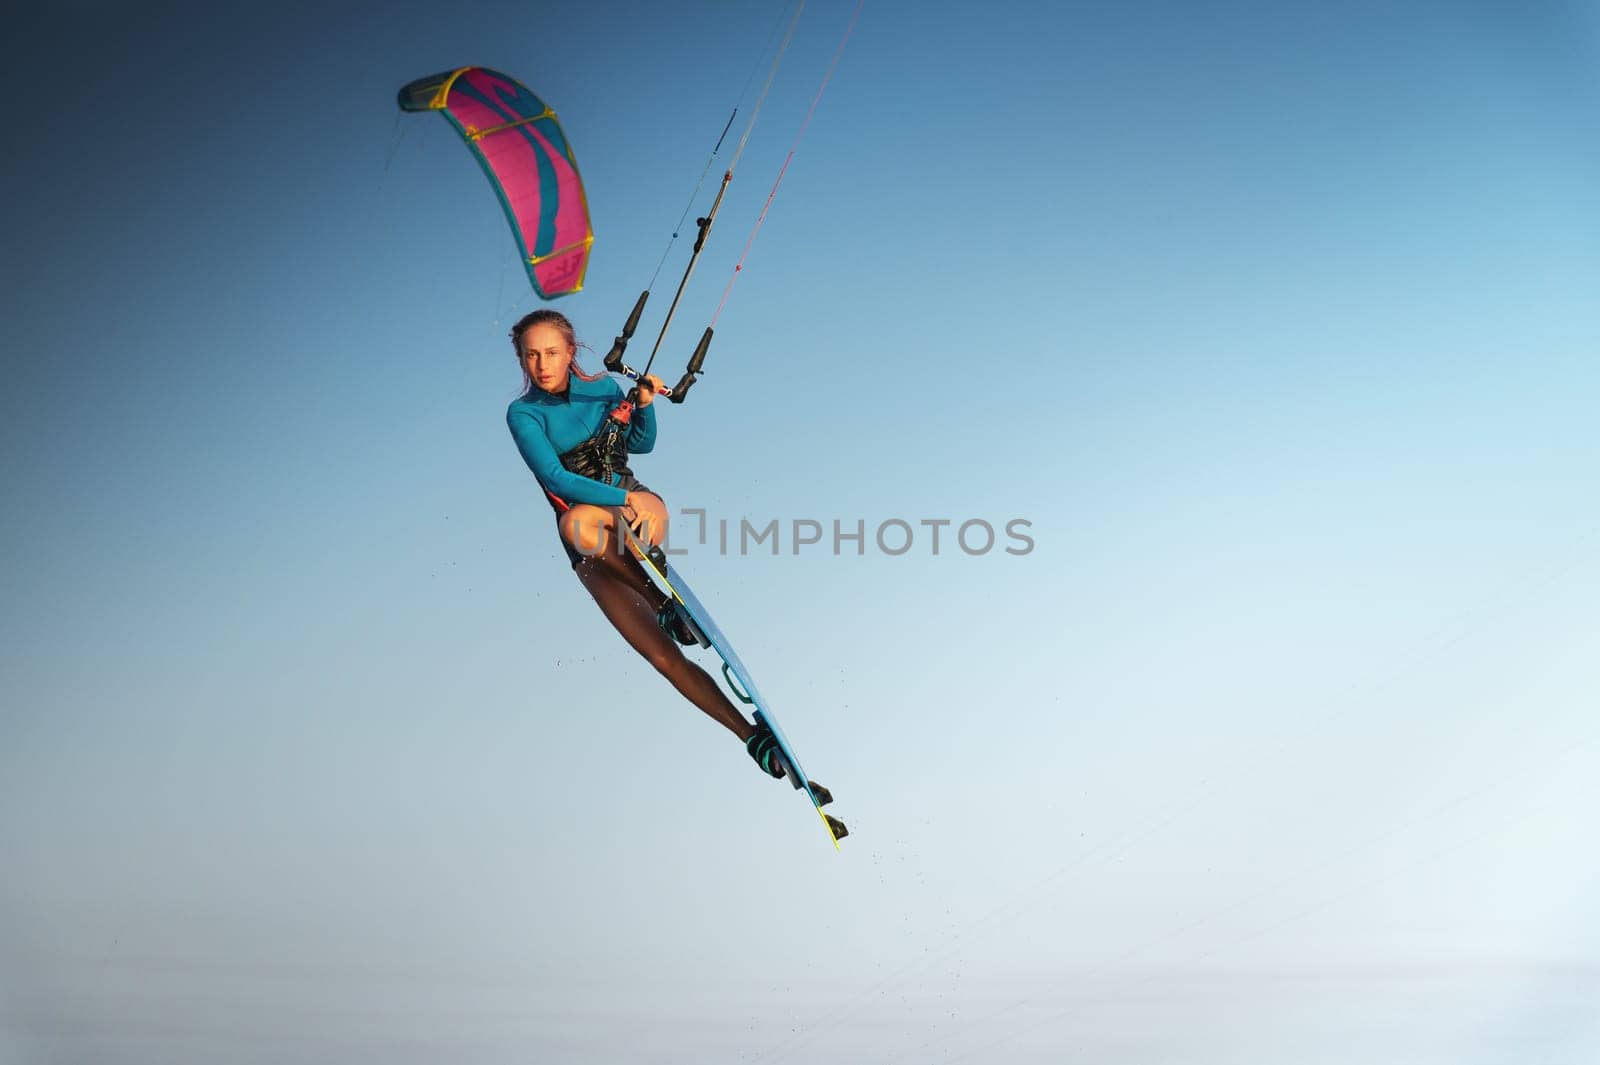 Caucasian woman kitesurfer athlete doing a trick in the air against a blue sky without a cloud. Professional kitesurfing training.